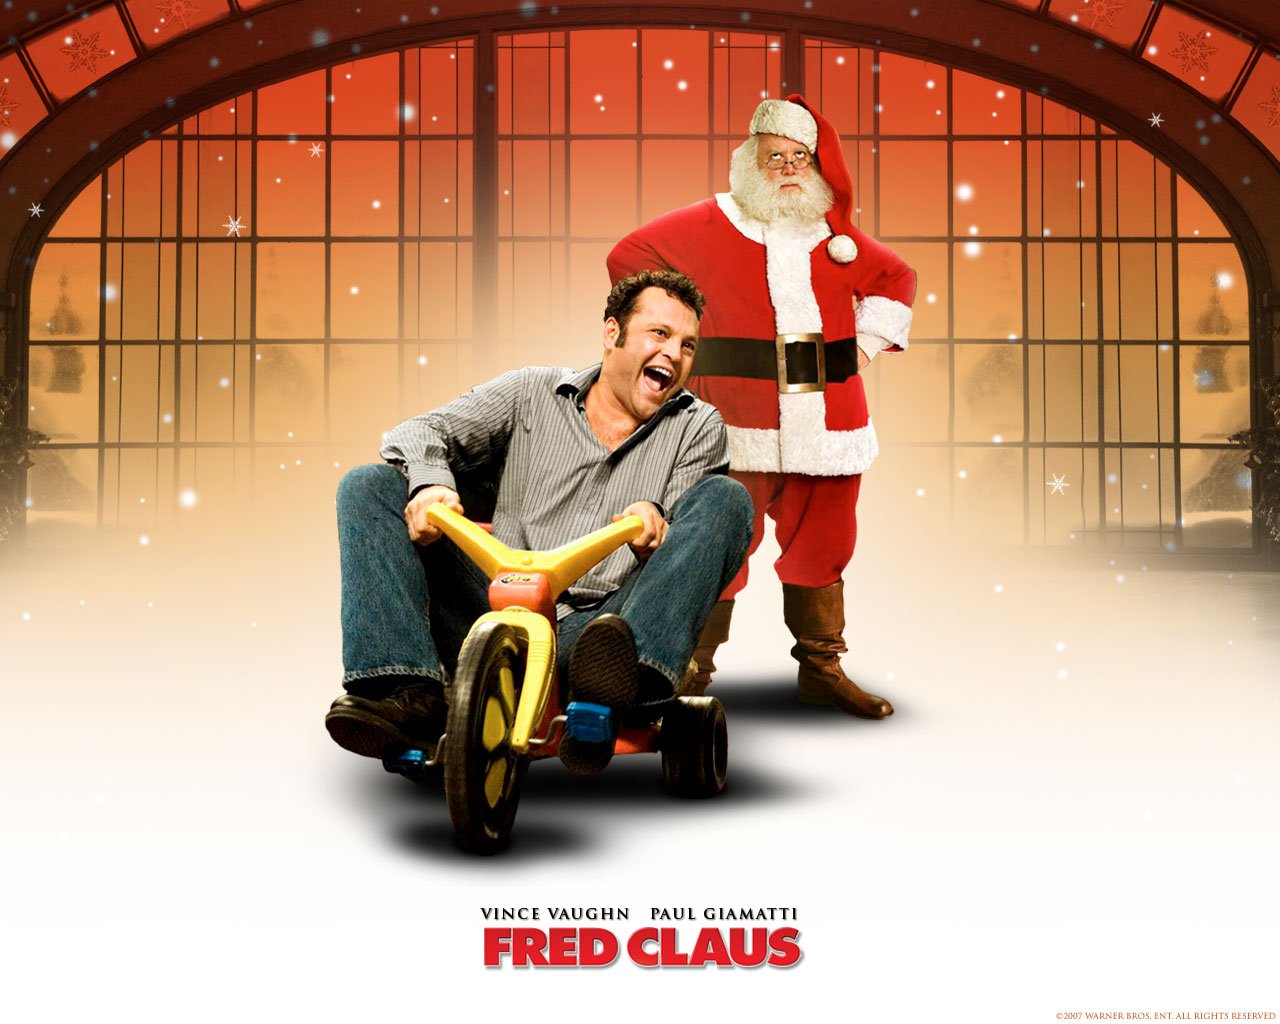 Fred Claus Wallpaper Moallpapers Org